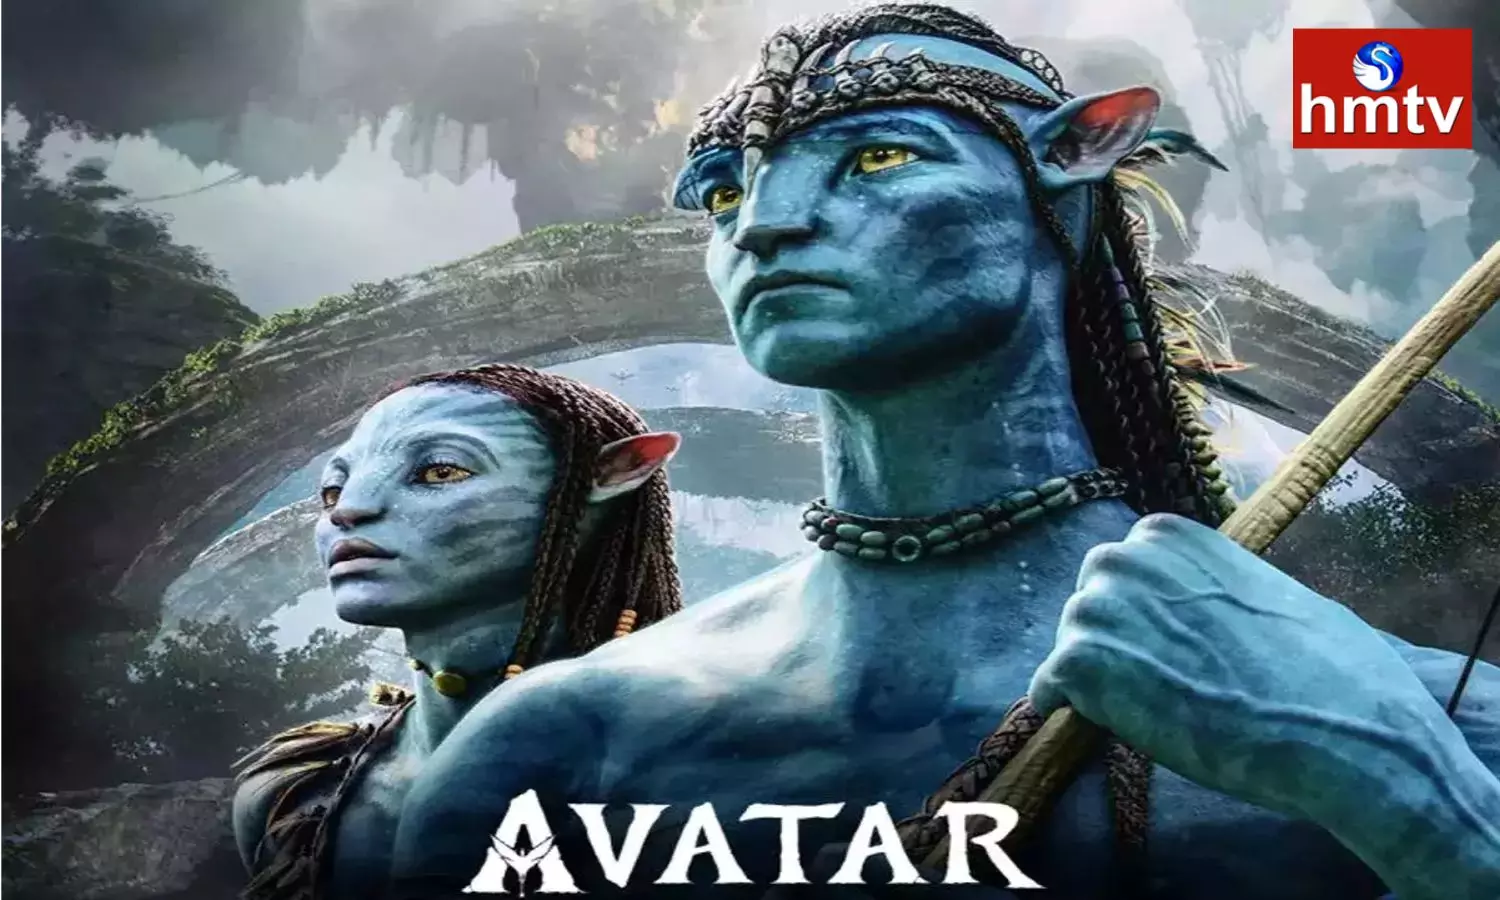 Avatar Movie is Going to Create a New Record in Telugu States Very Soon